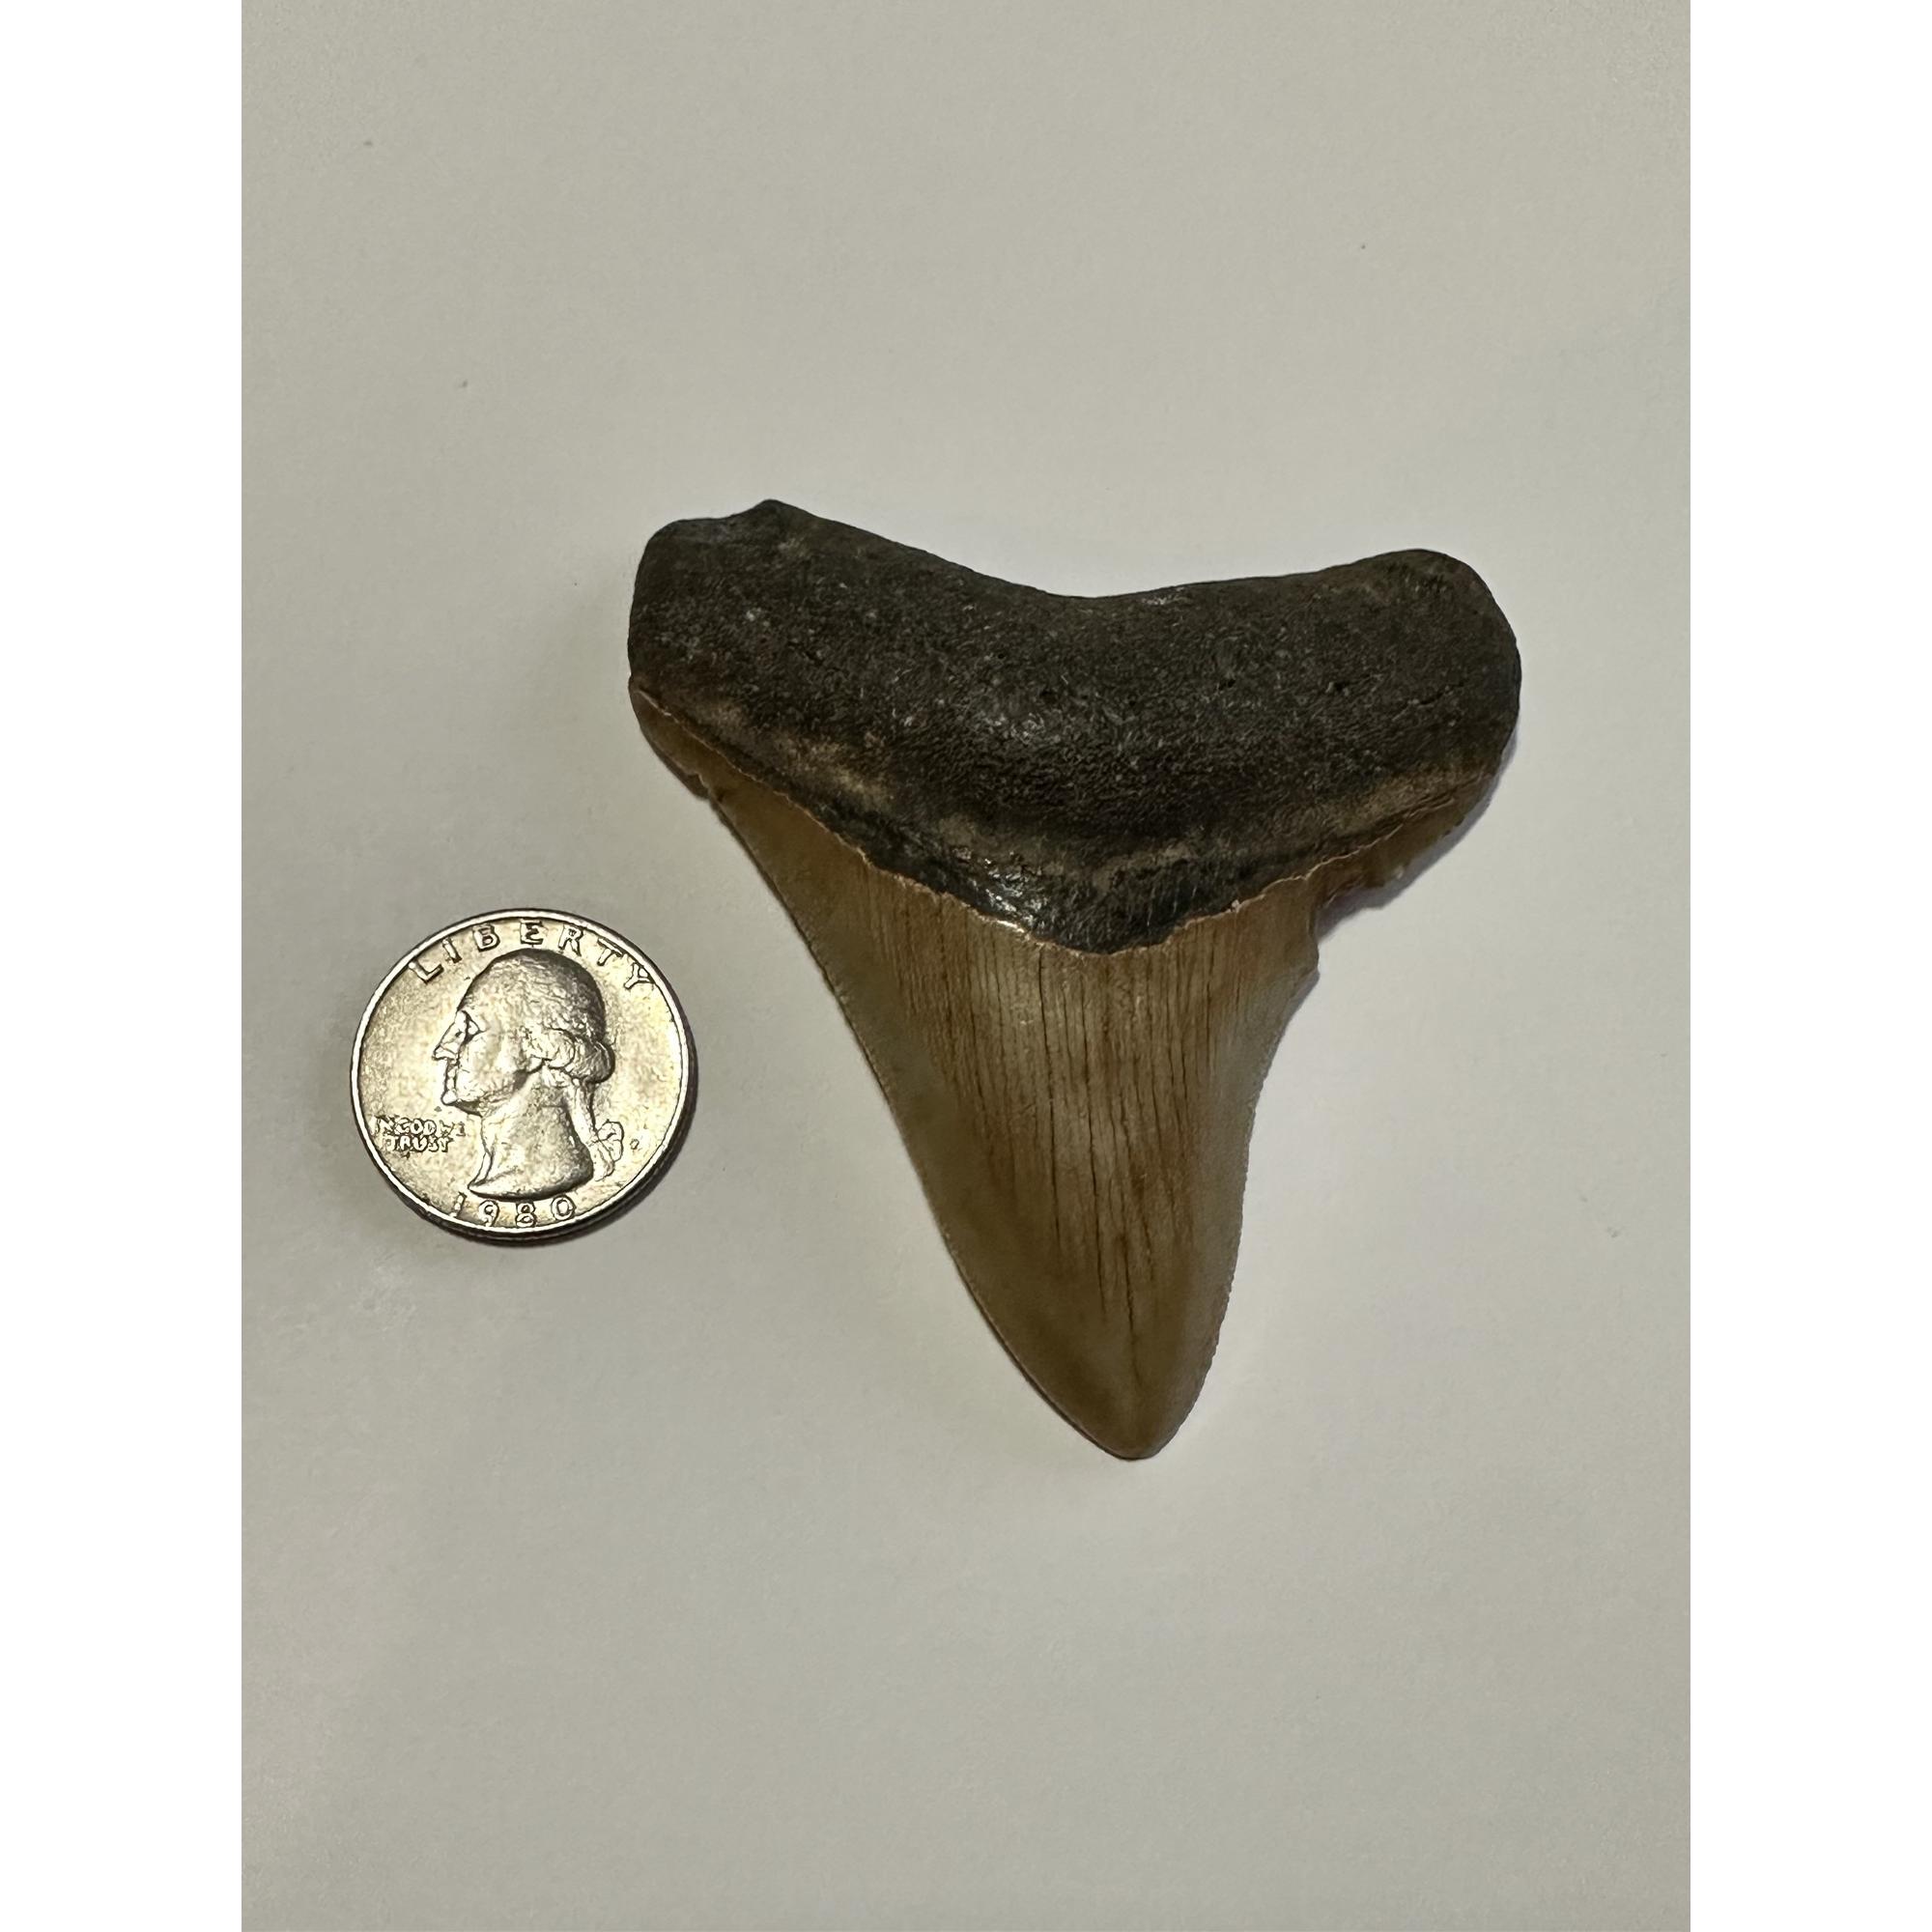 Just gorgeous golden megalodon tooth is from South Carolina and has wonderful serrations